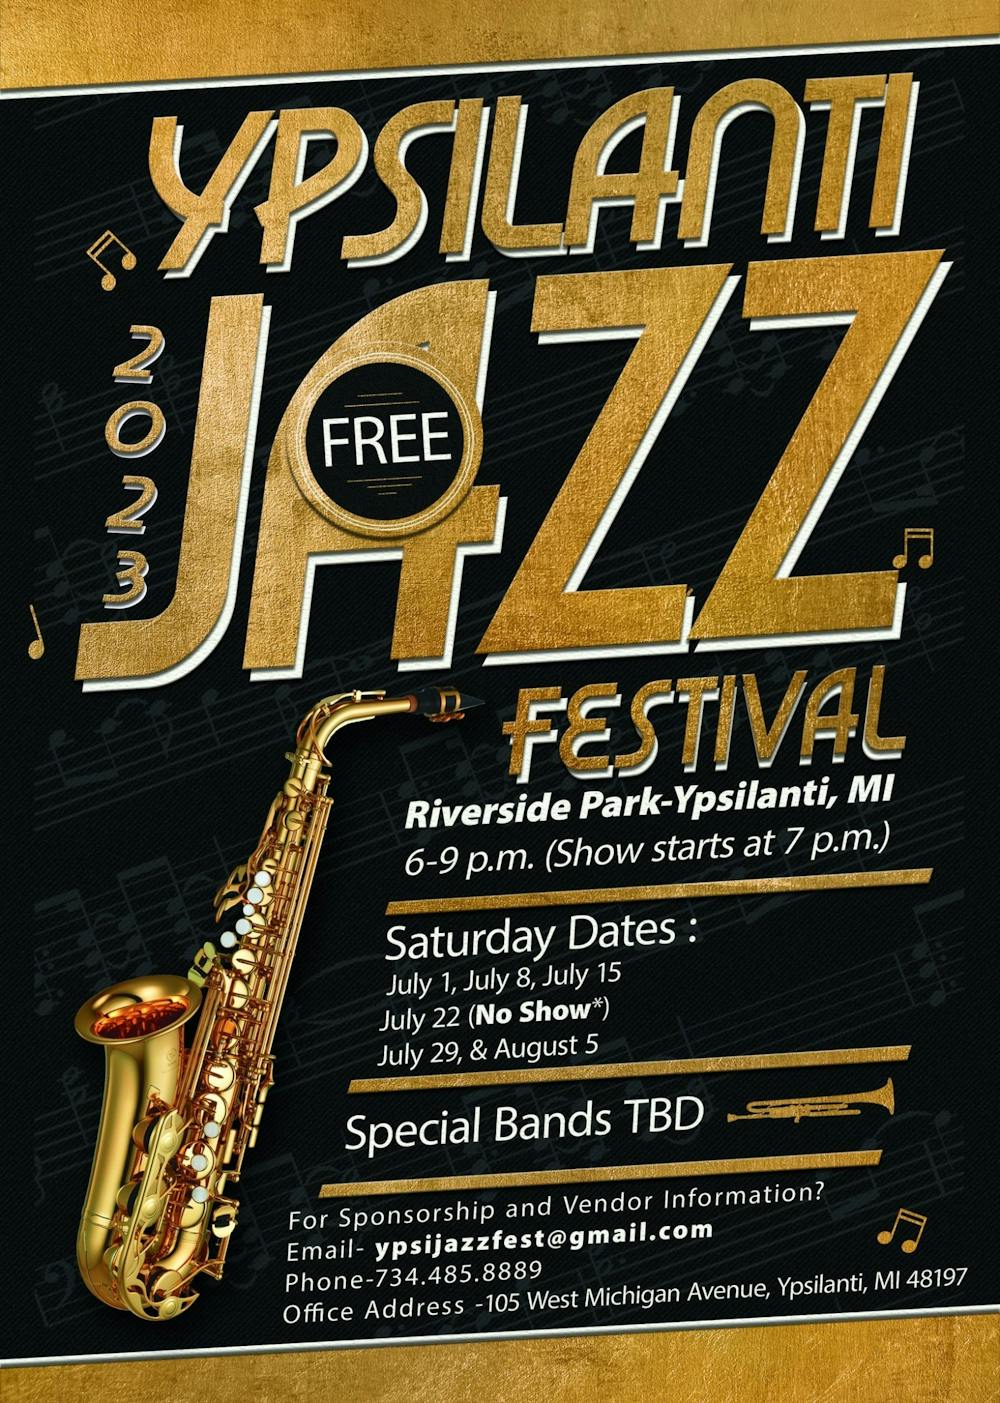 Ypsilanti Jazz Festival returns with music and festivities for the